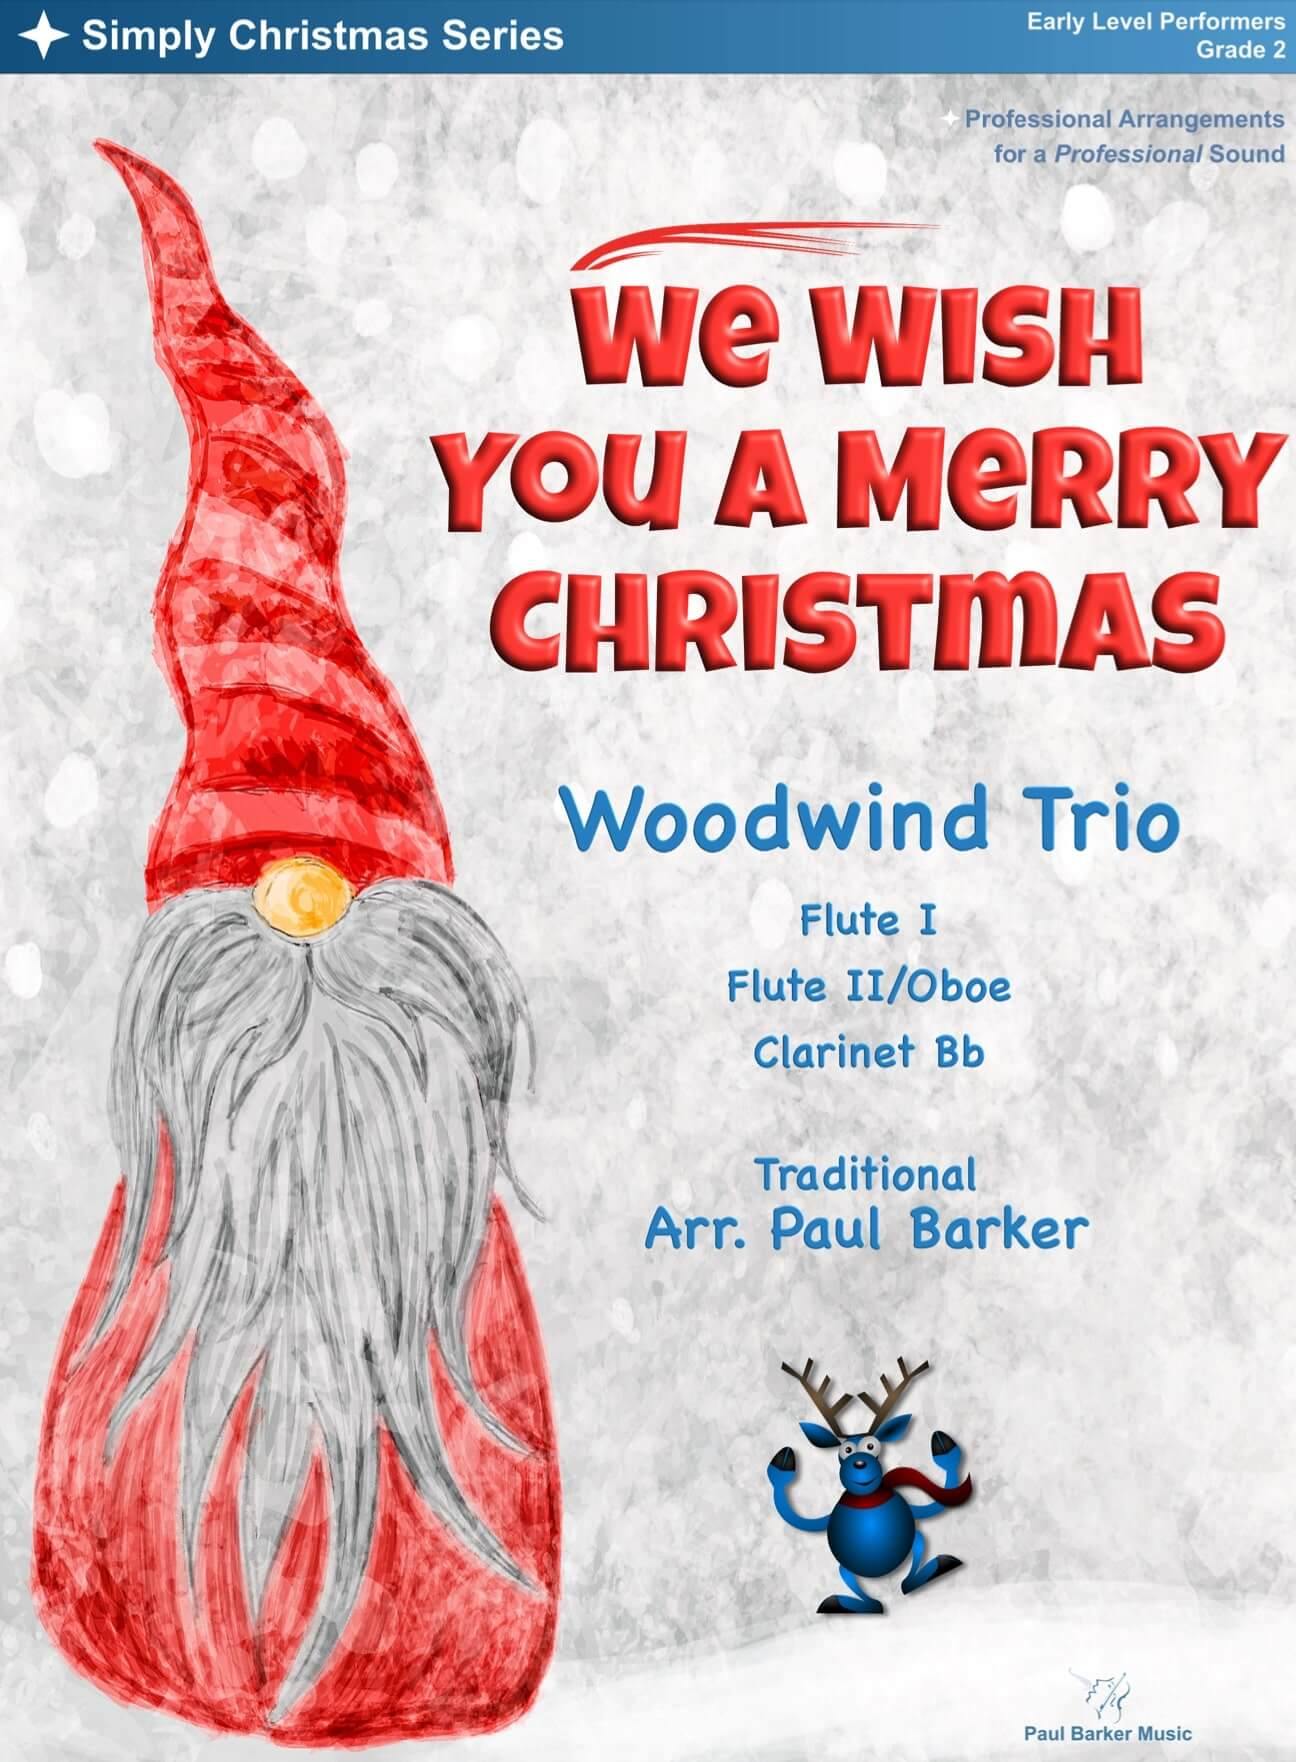 We Wish You A Merry Christmas (Woodwind Trio) - Paul Barker Music 